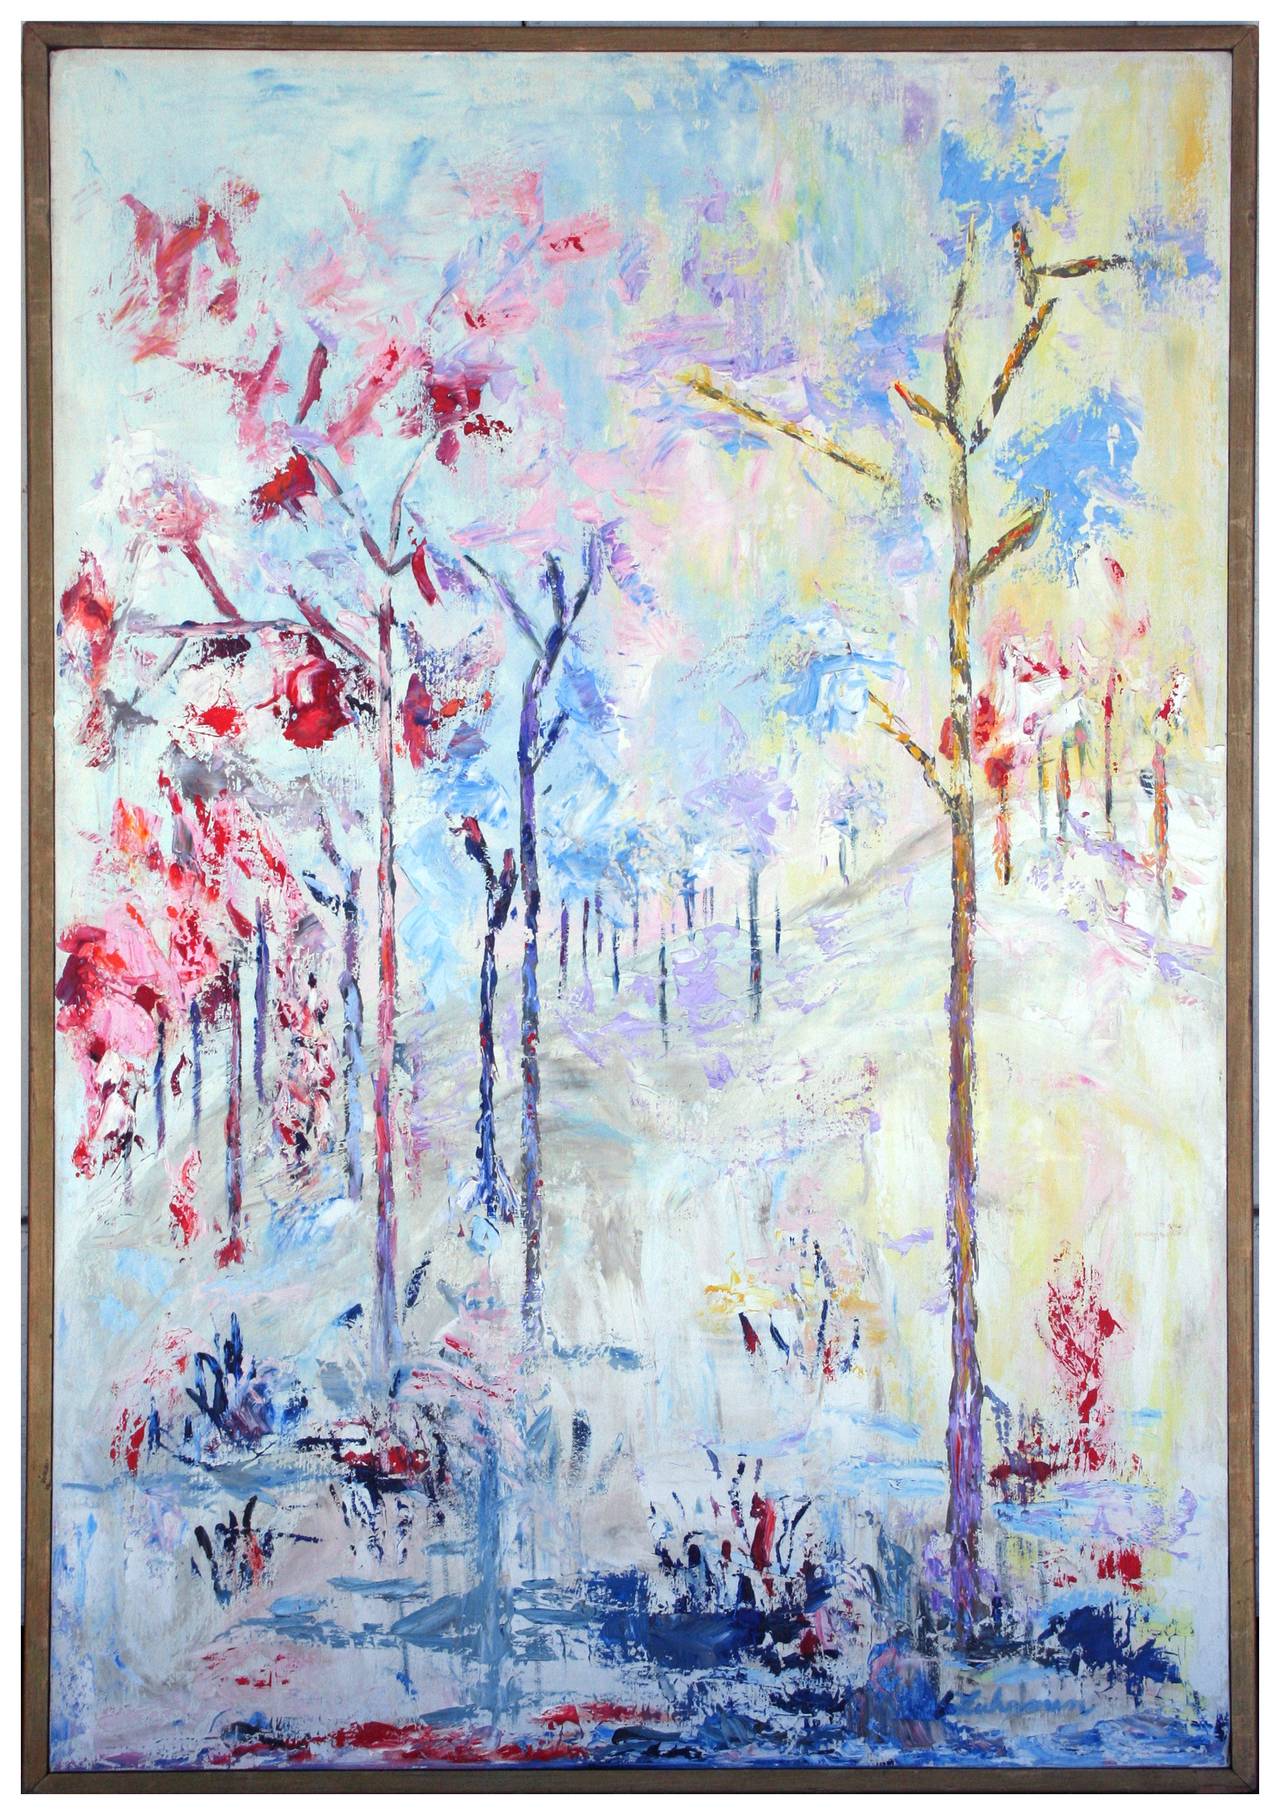 Gorgeous mid century modern impasto oil painting of colorful trees by San Francisco artist Charles Fuhrman (American, 1940-1995). Signed "Fuhrman" lower right corner. Image, 42"H x 22"L.

He was a native of New York City, where he earned a degree in